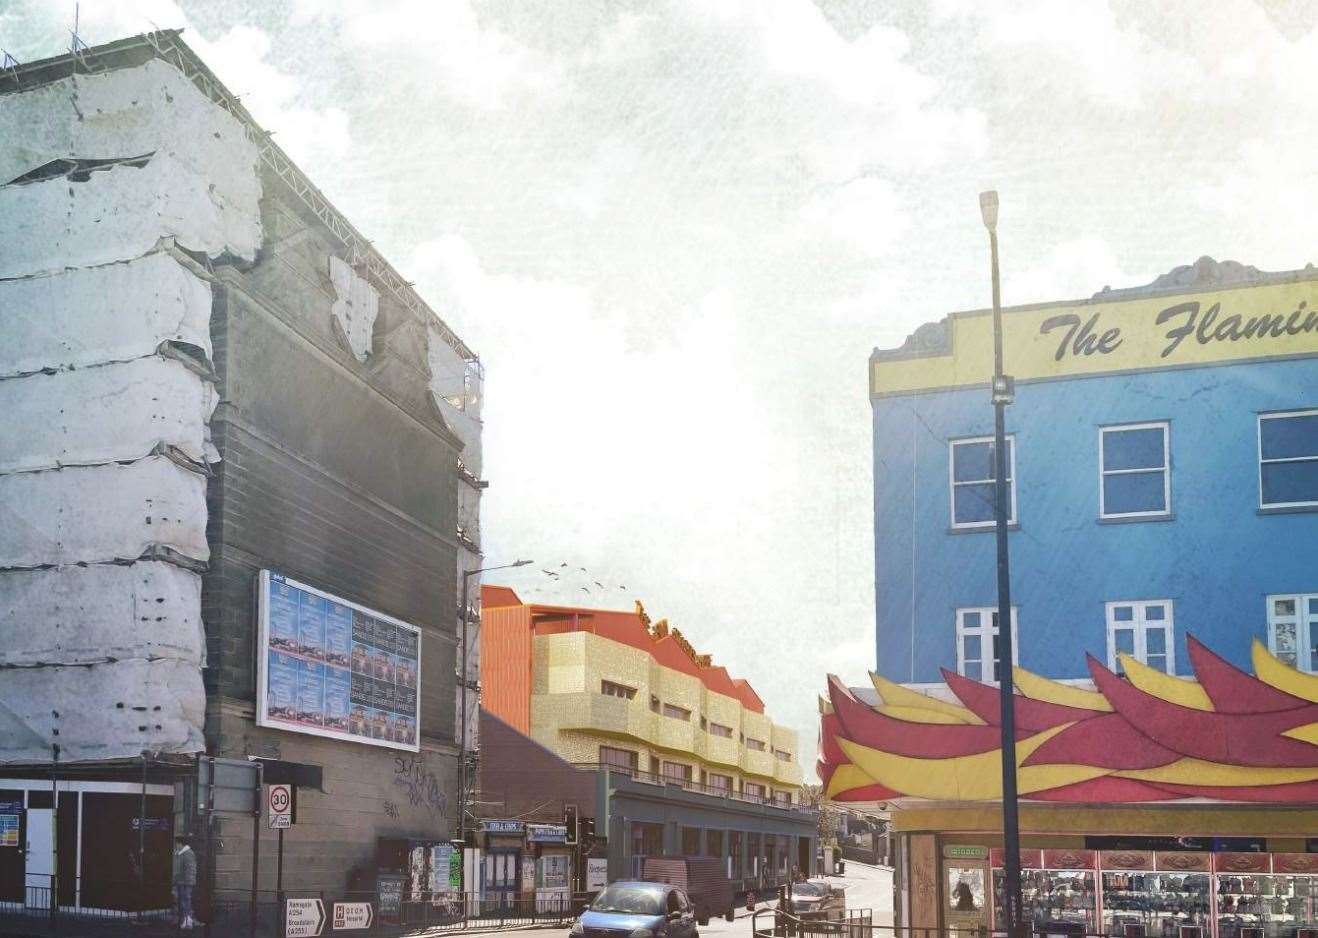 The extension planned for the site in Margate has been branded an "eyesore" by some locals